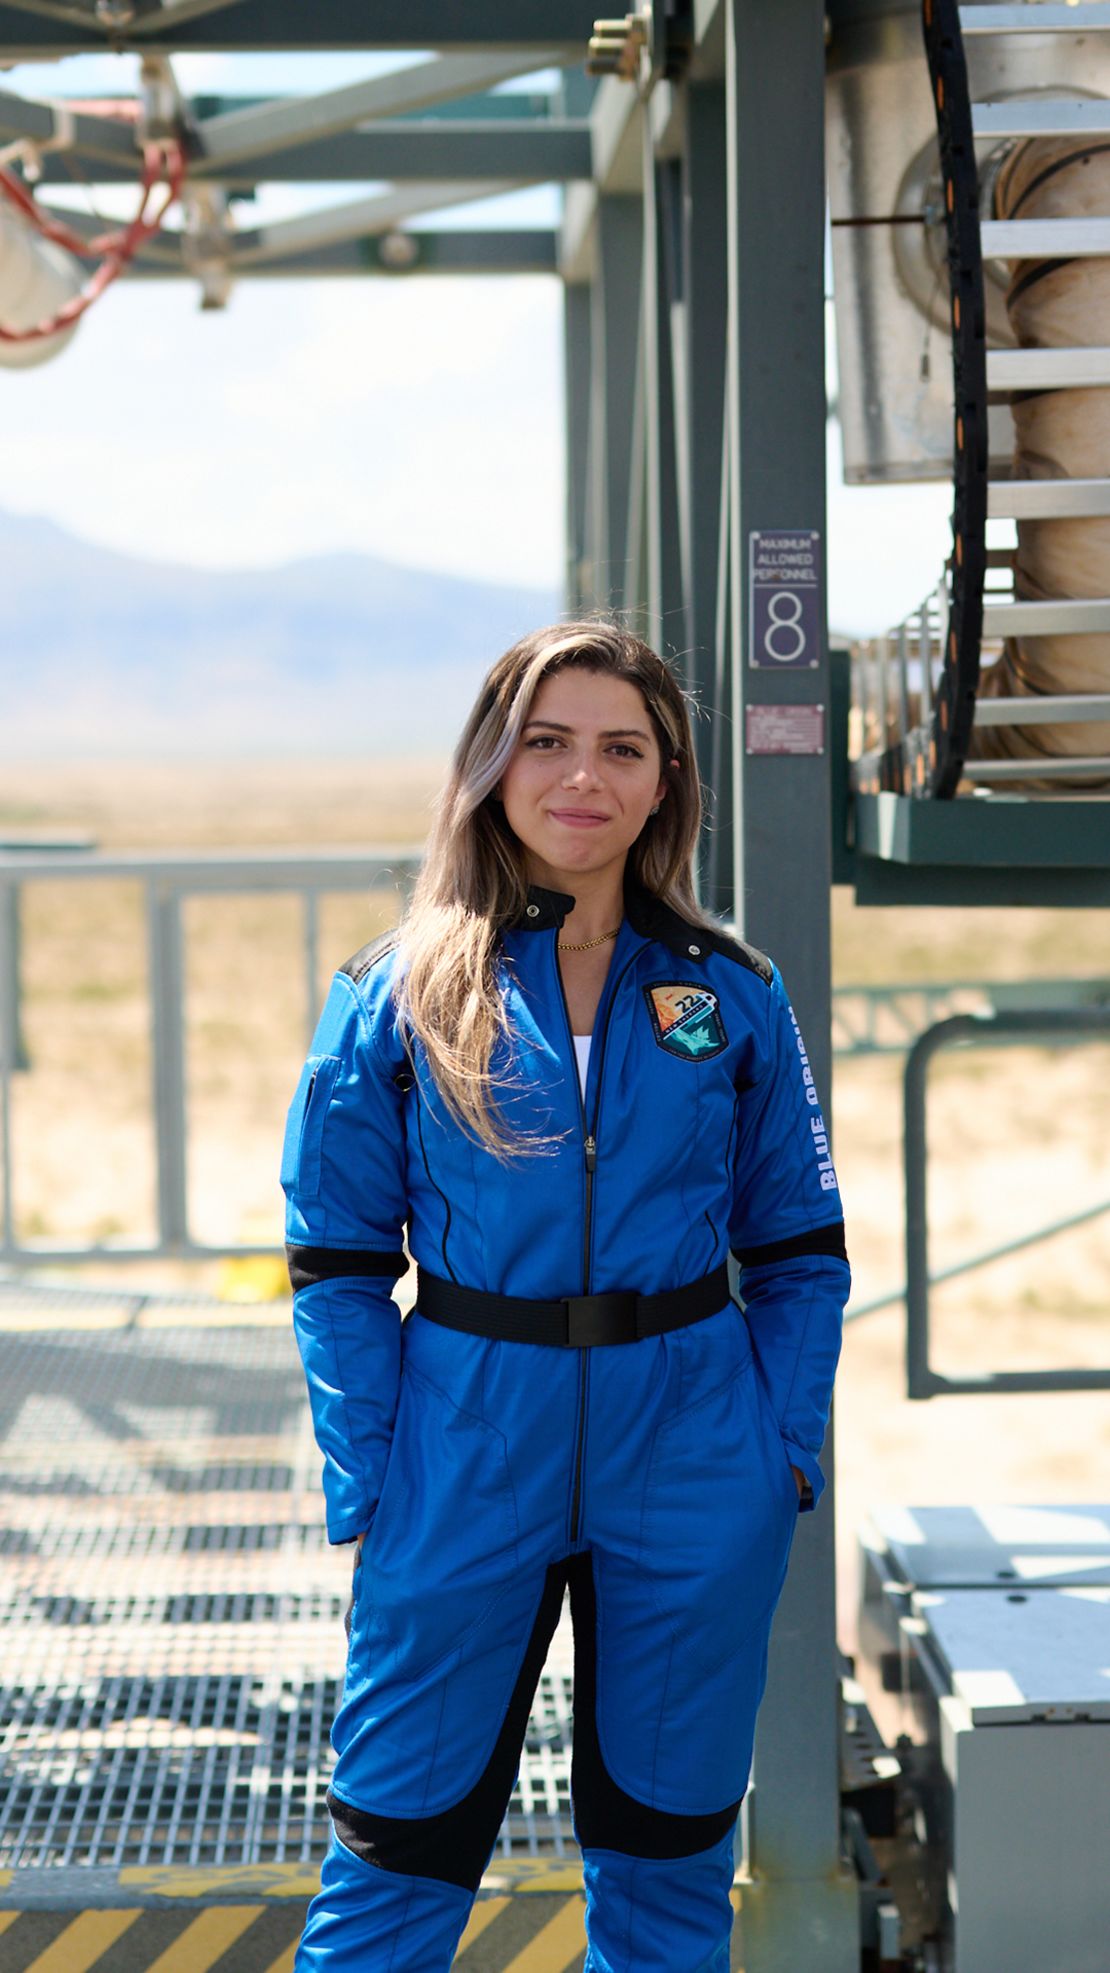 Sabry founded the Deep Space Initiative in response to the lack of opportunities in the space field.